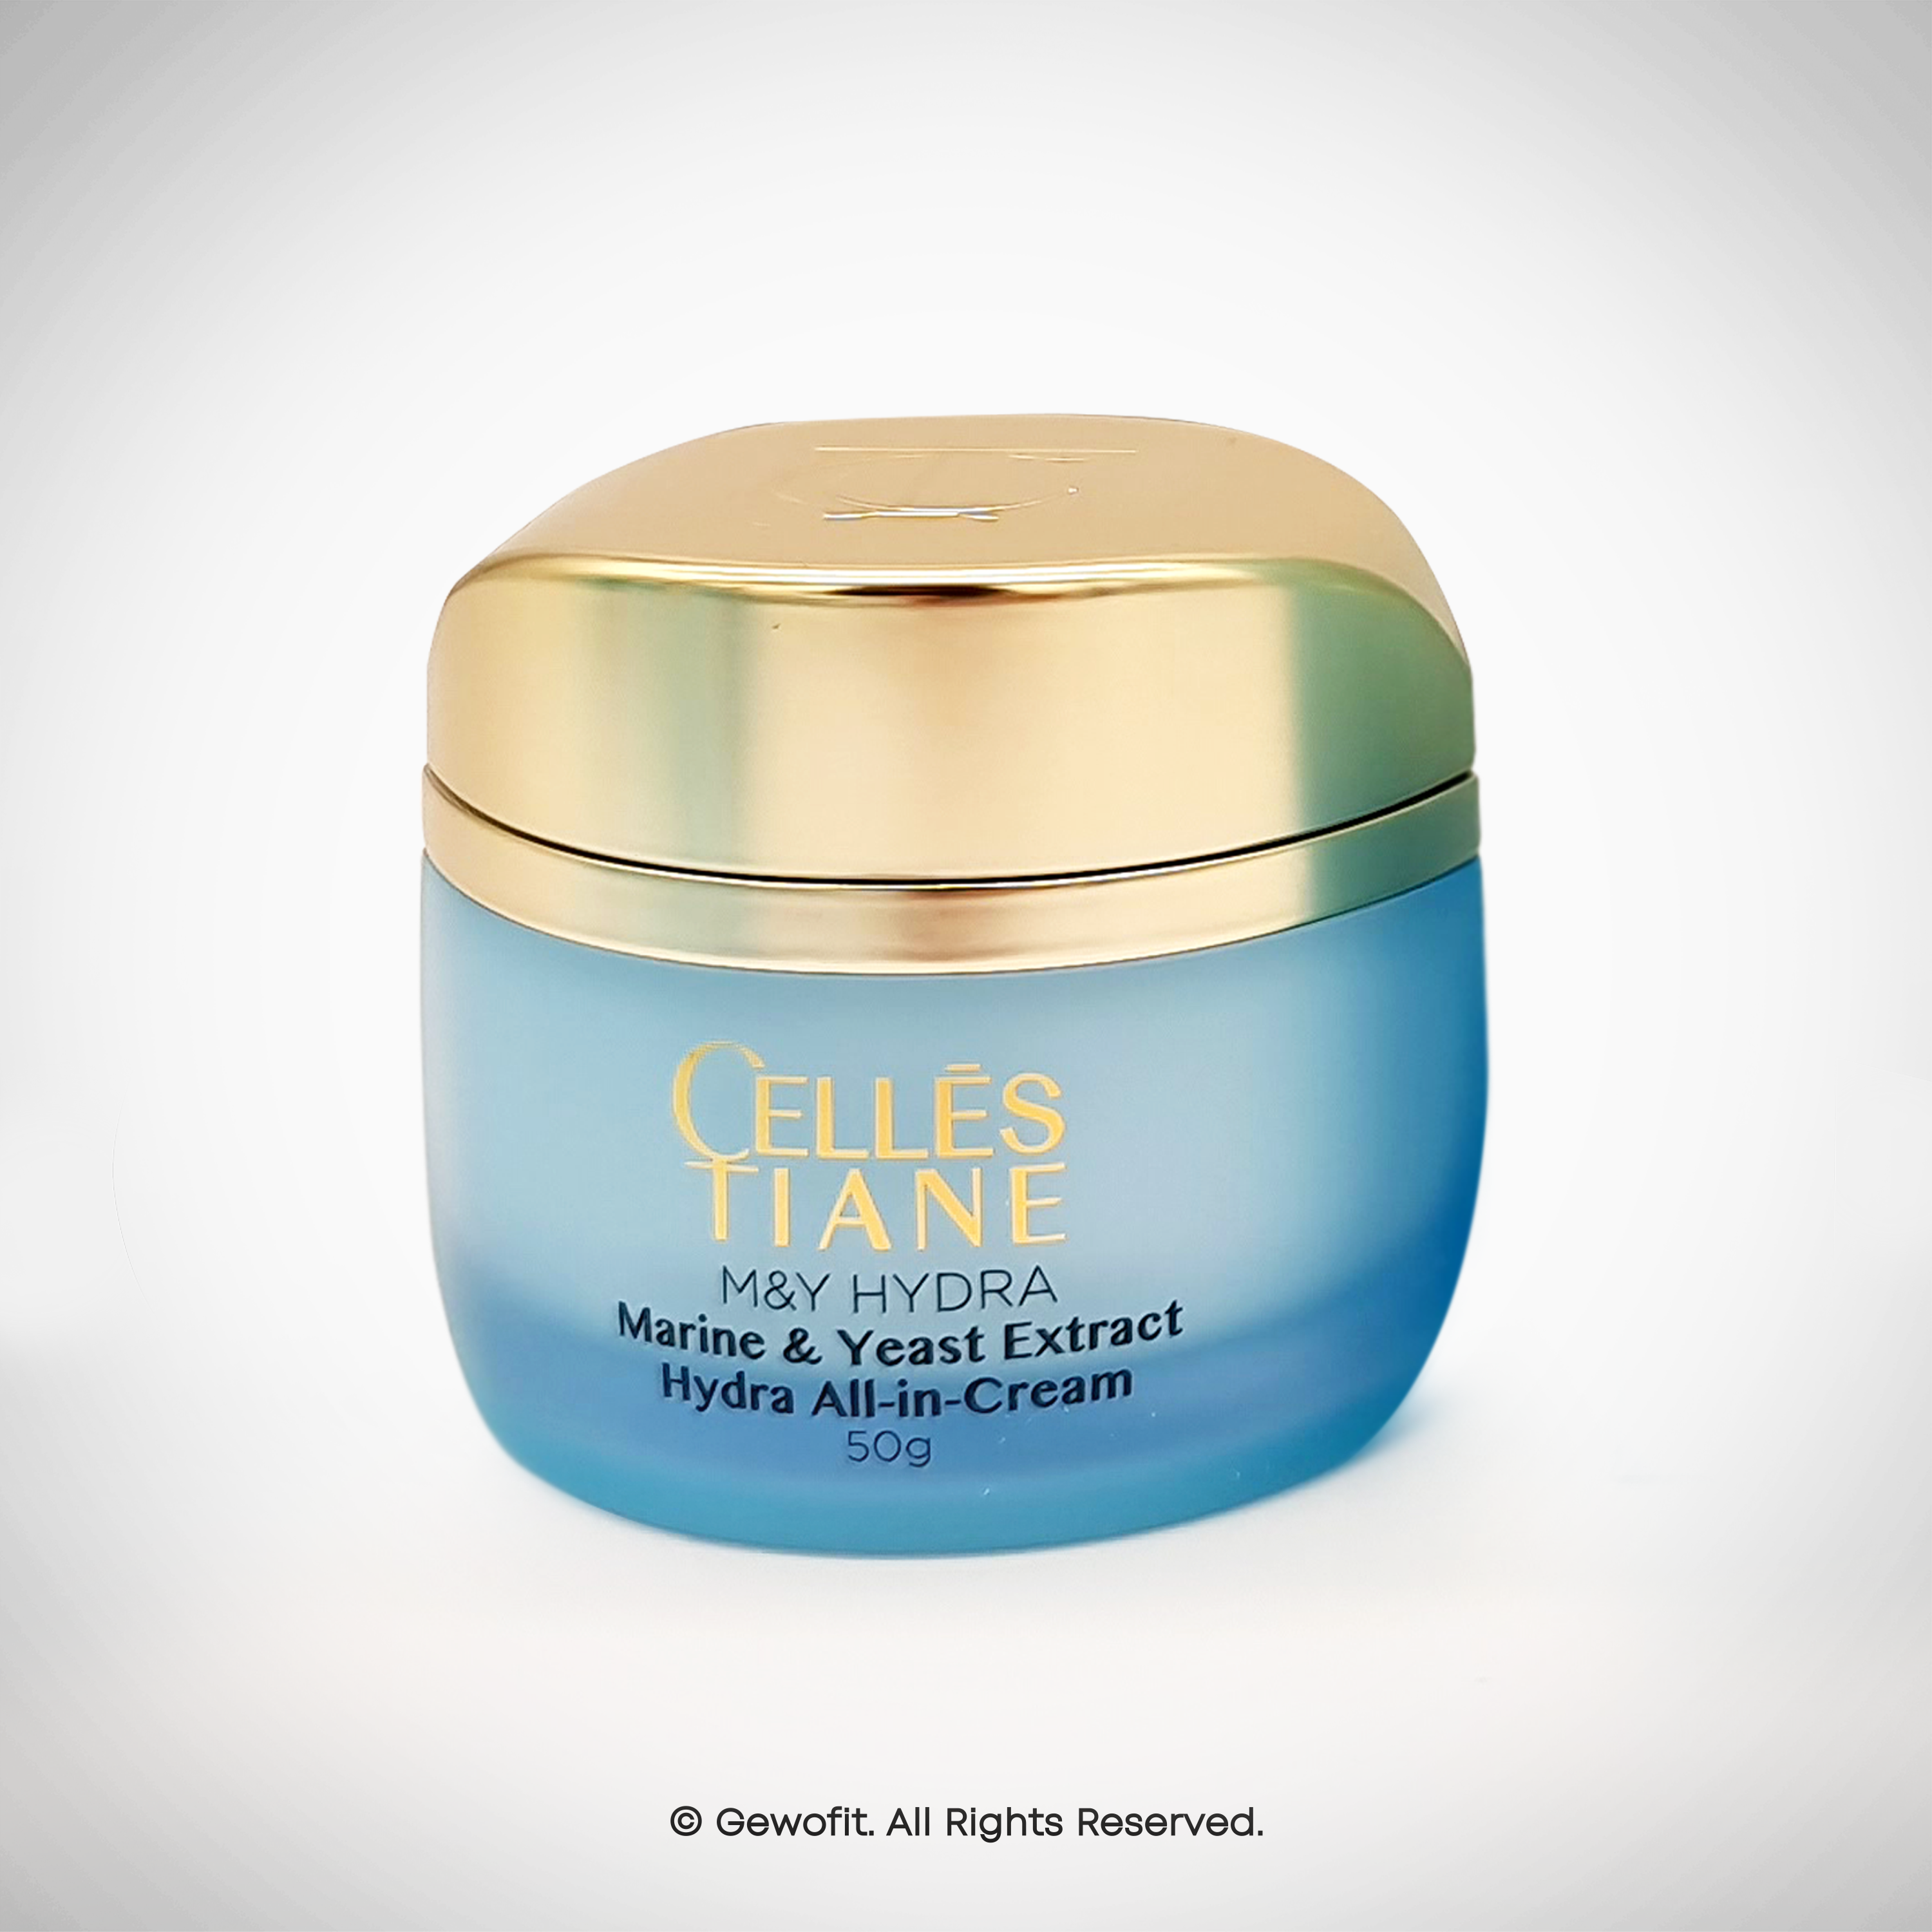 TIENS Marine & Yeast Extract Hydra All-in-One Cream